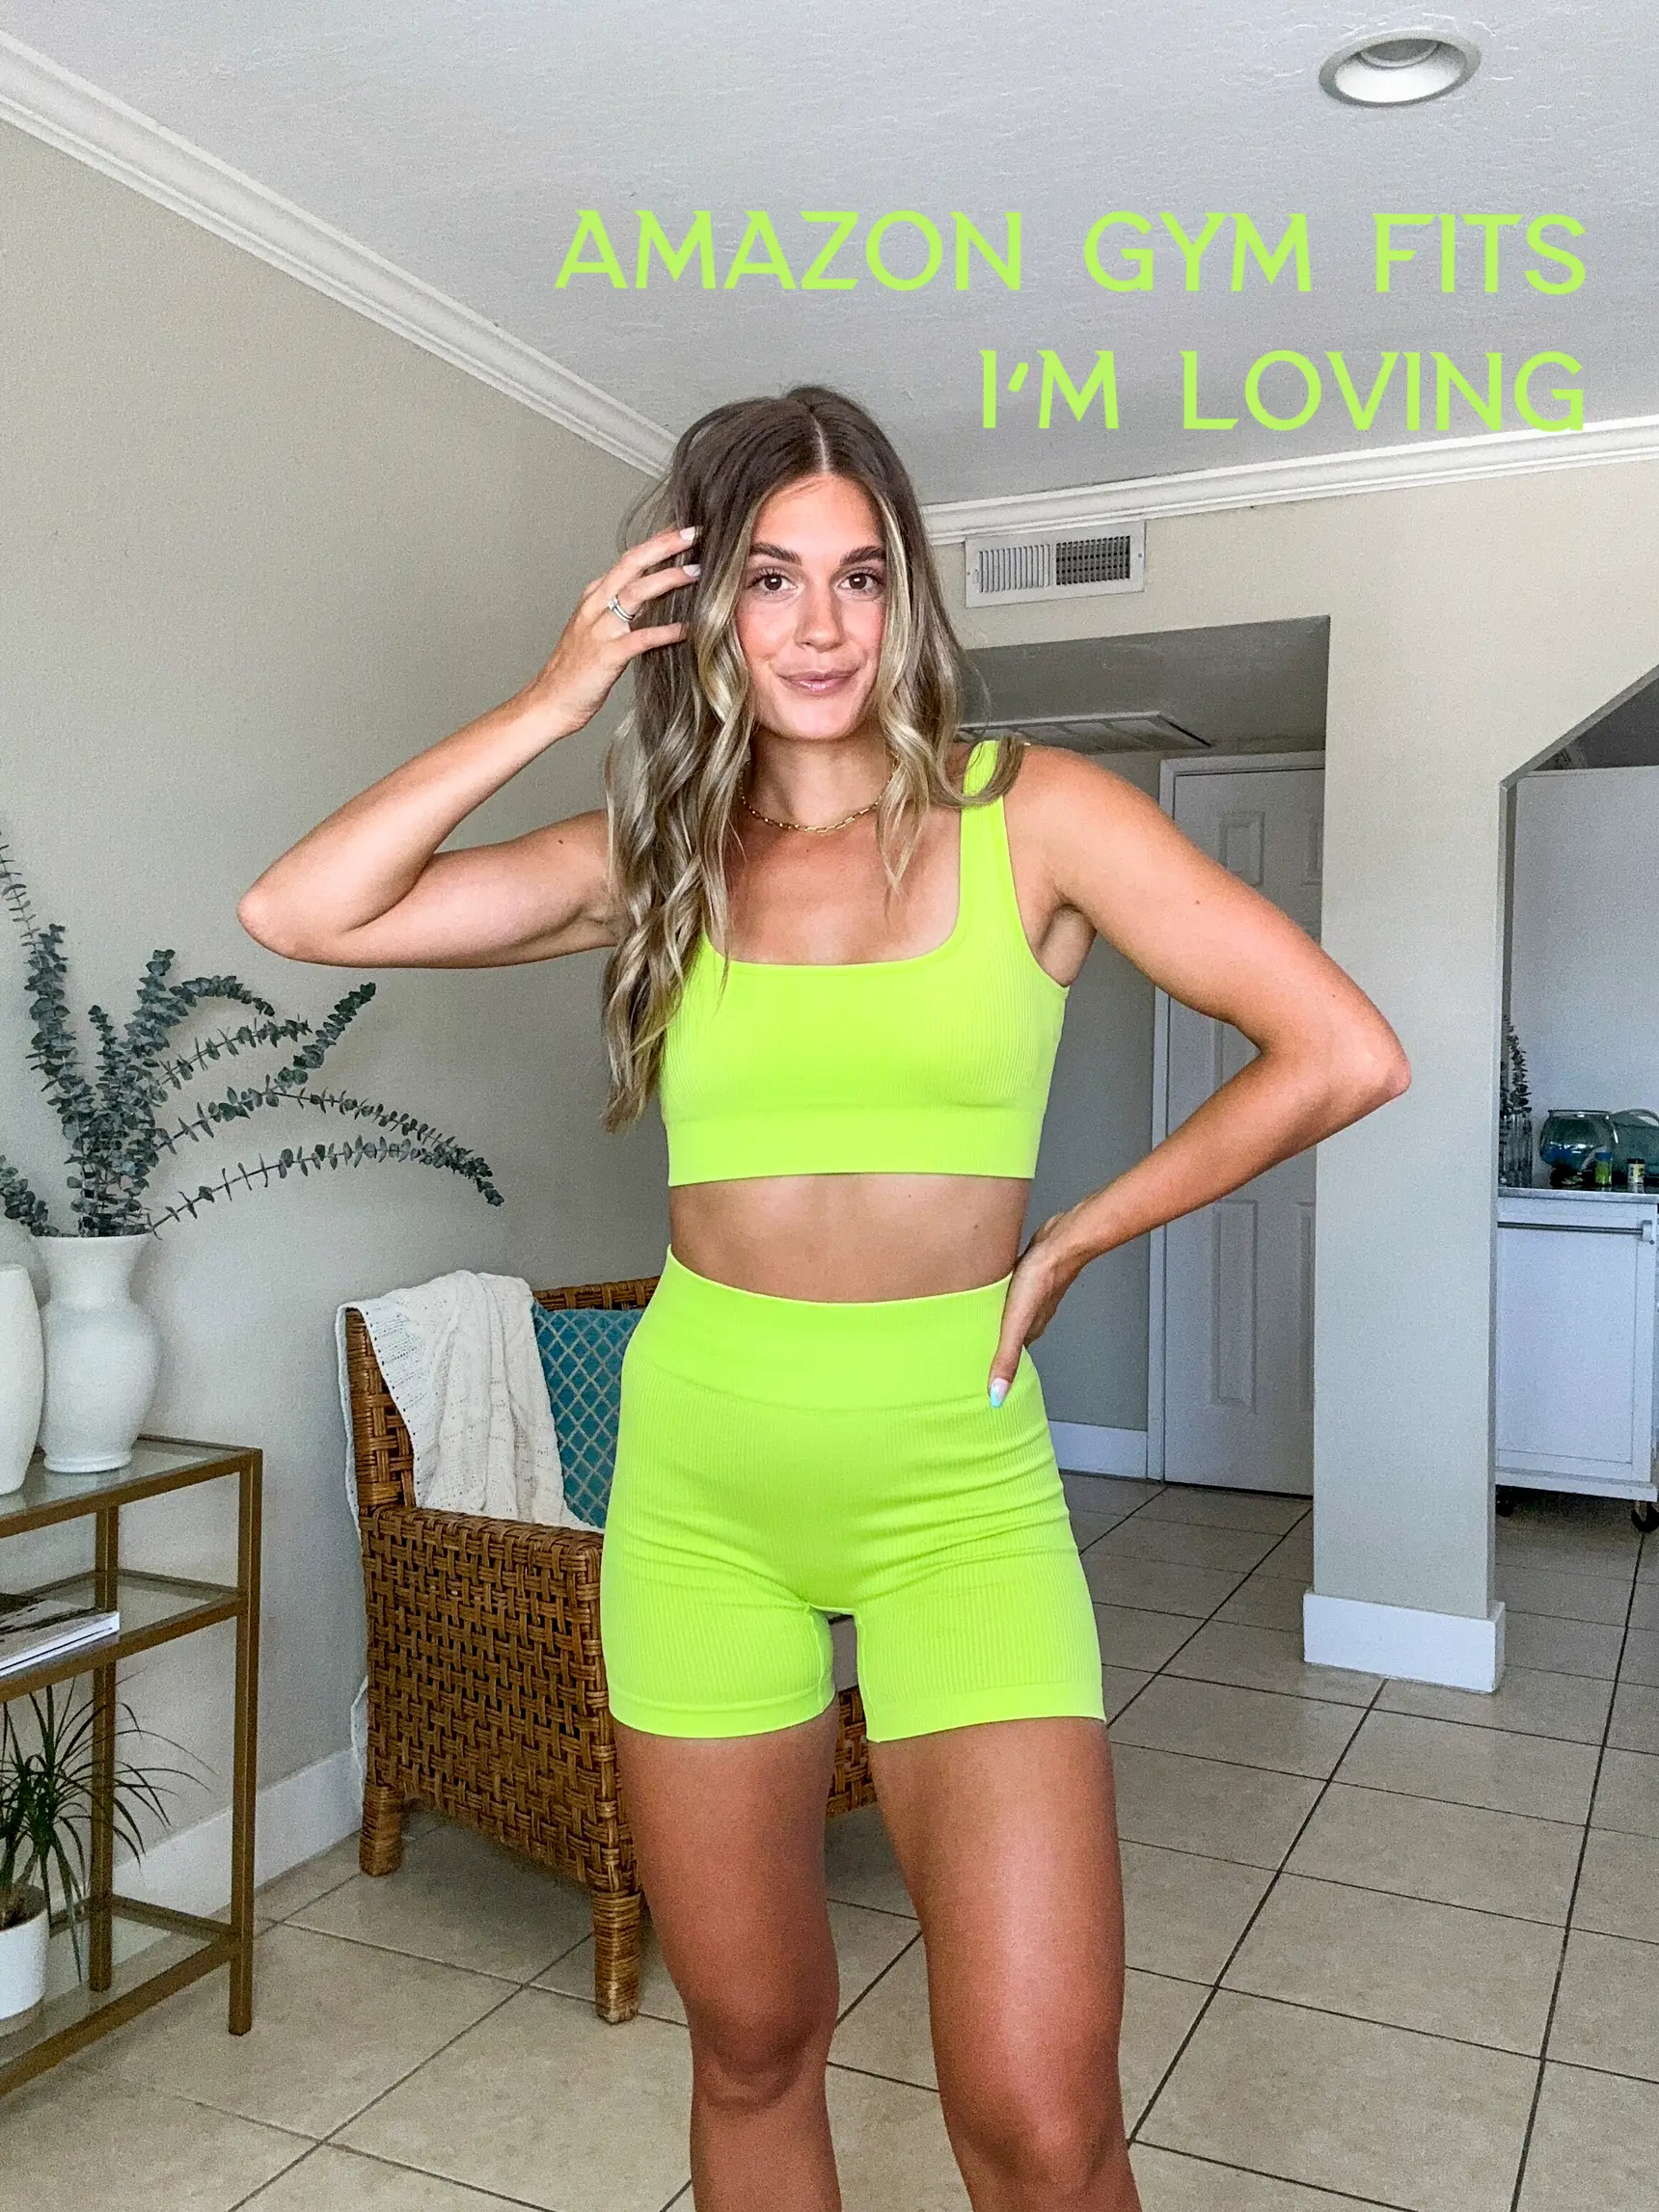 I'm a gym girl and tried on Lululemon dupes from Shein - they're